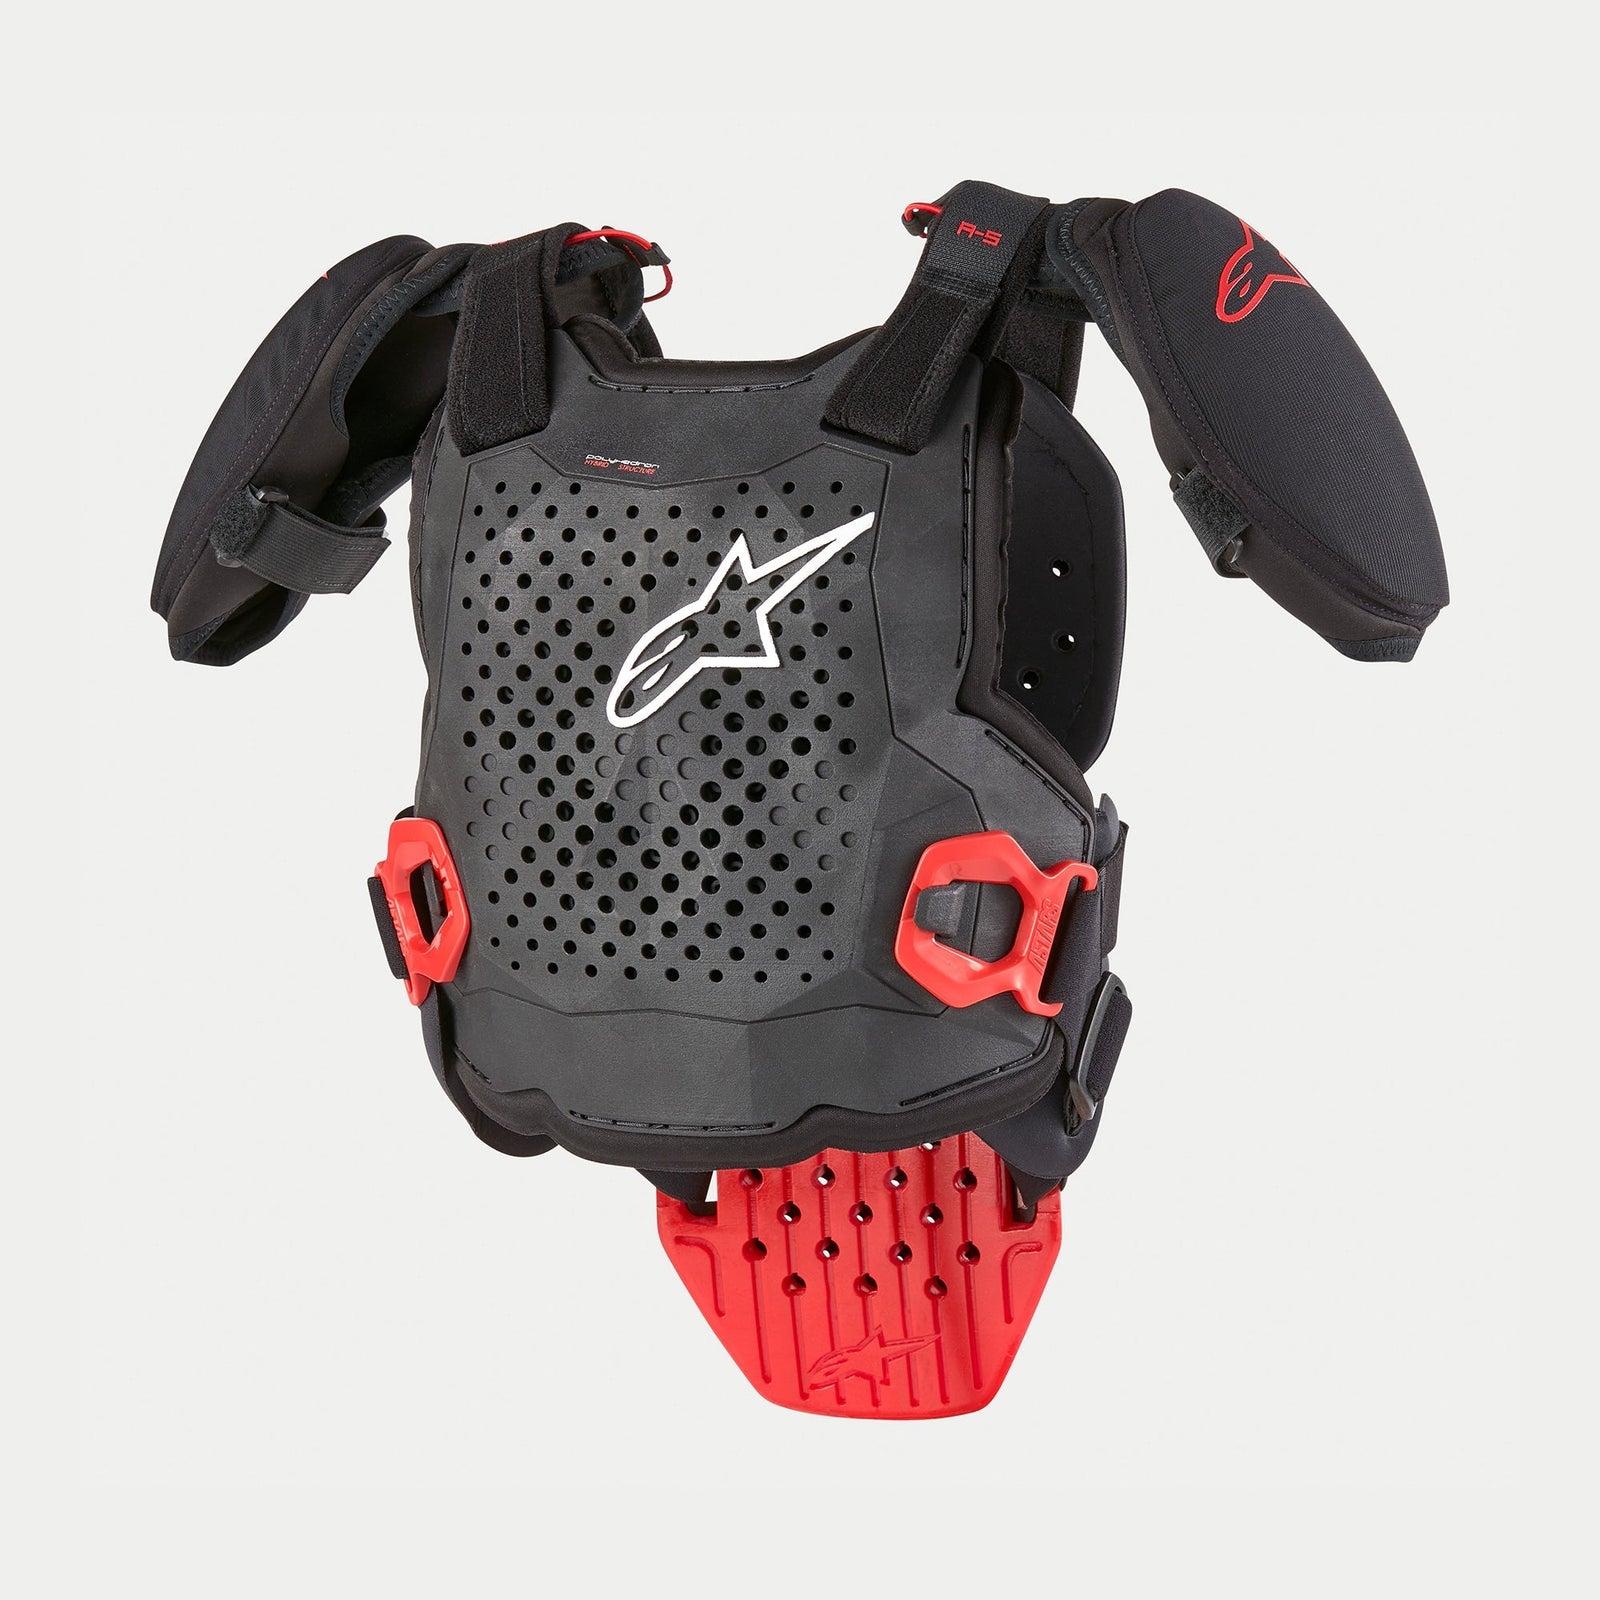 Youth A-5 S Chest Protector